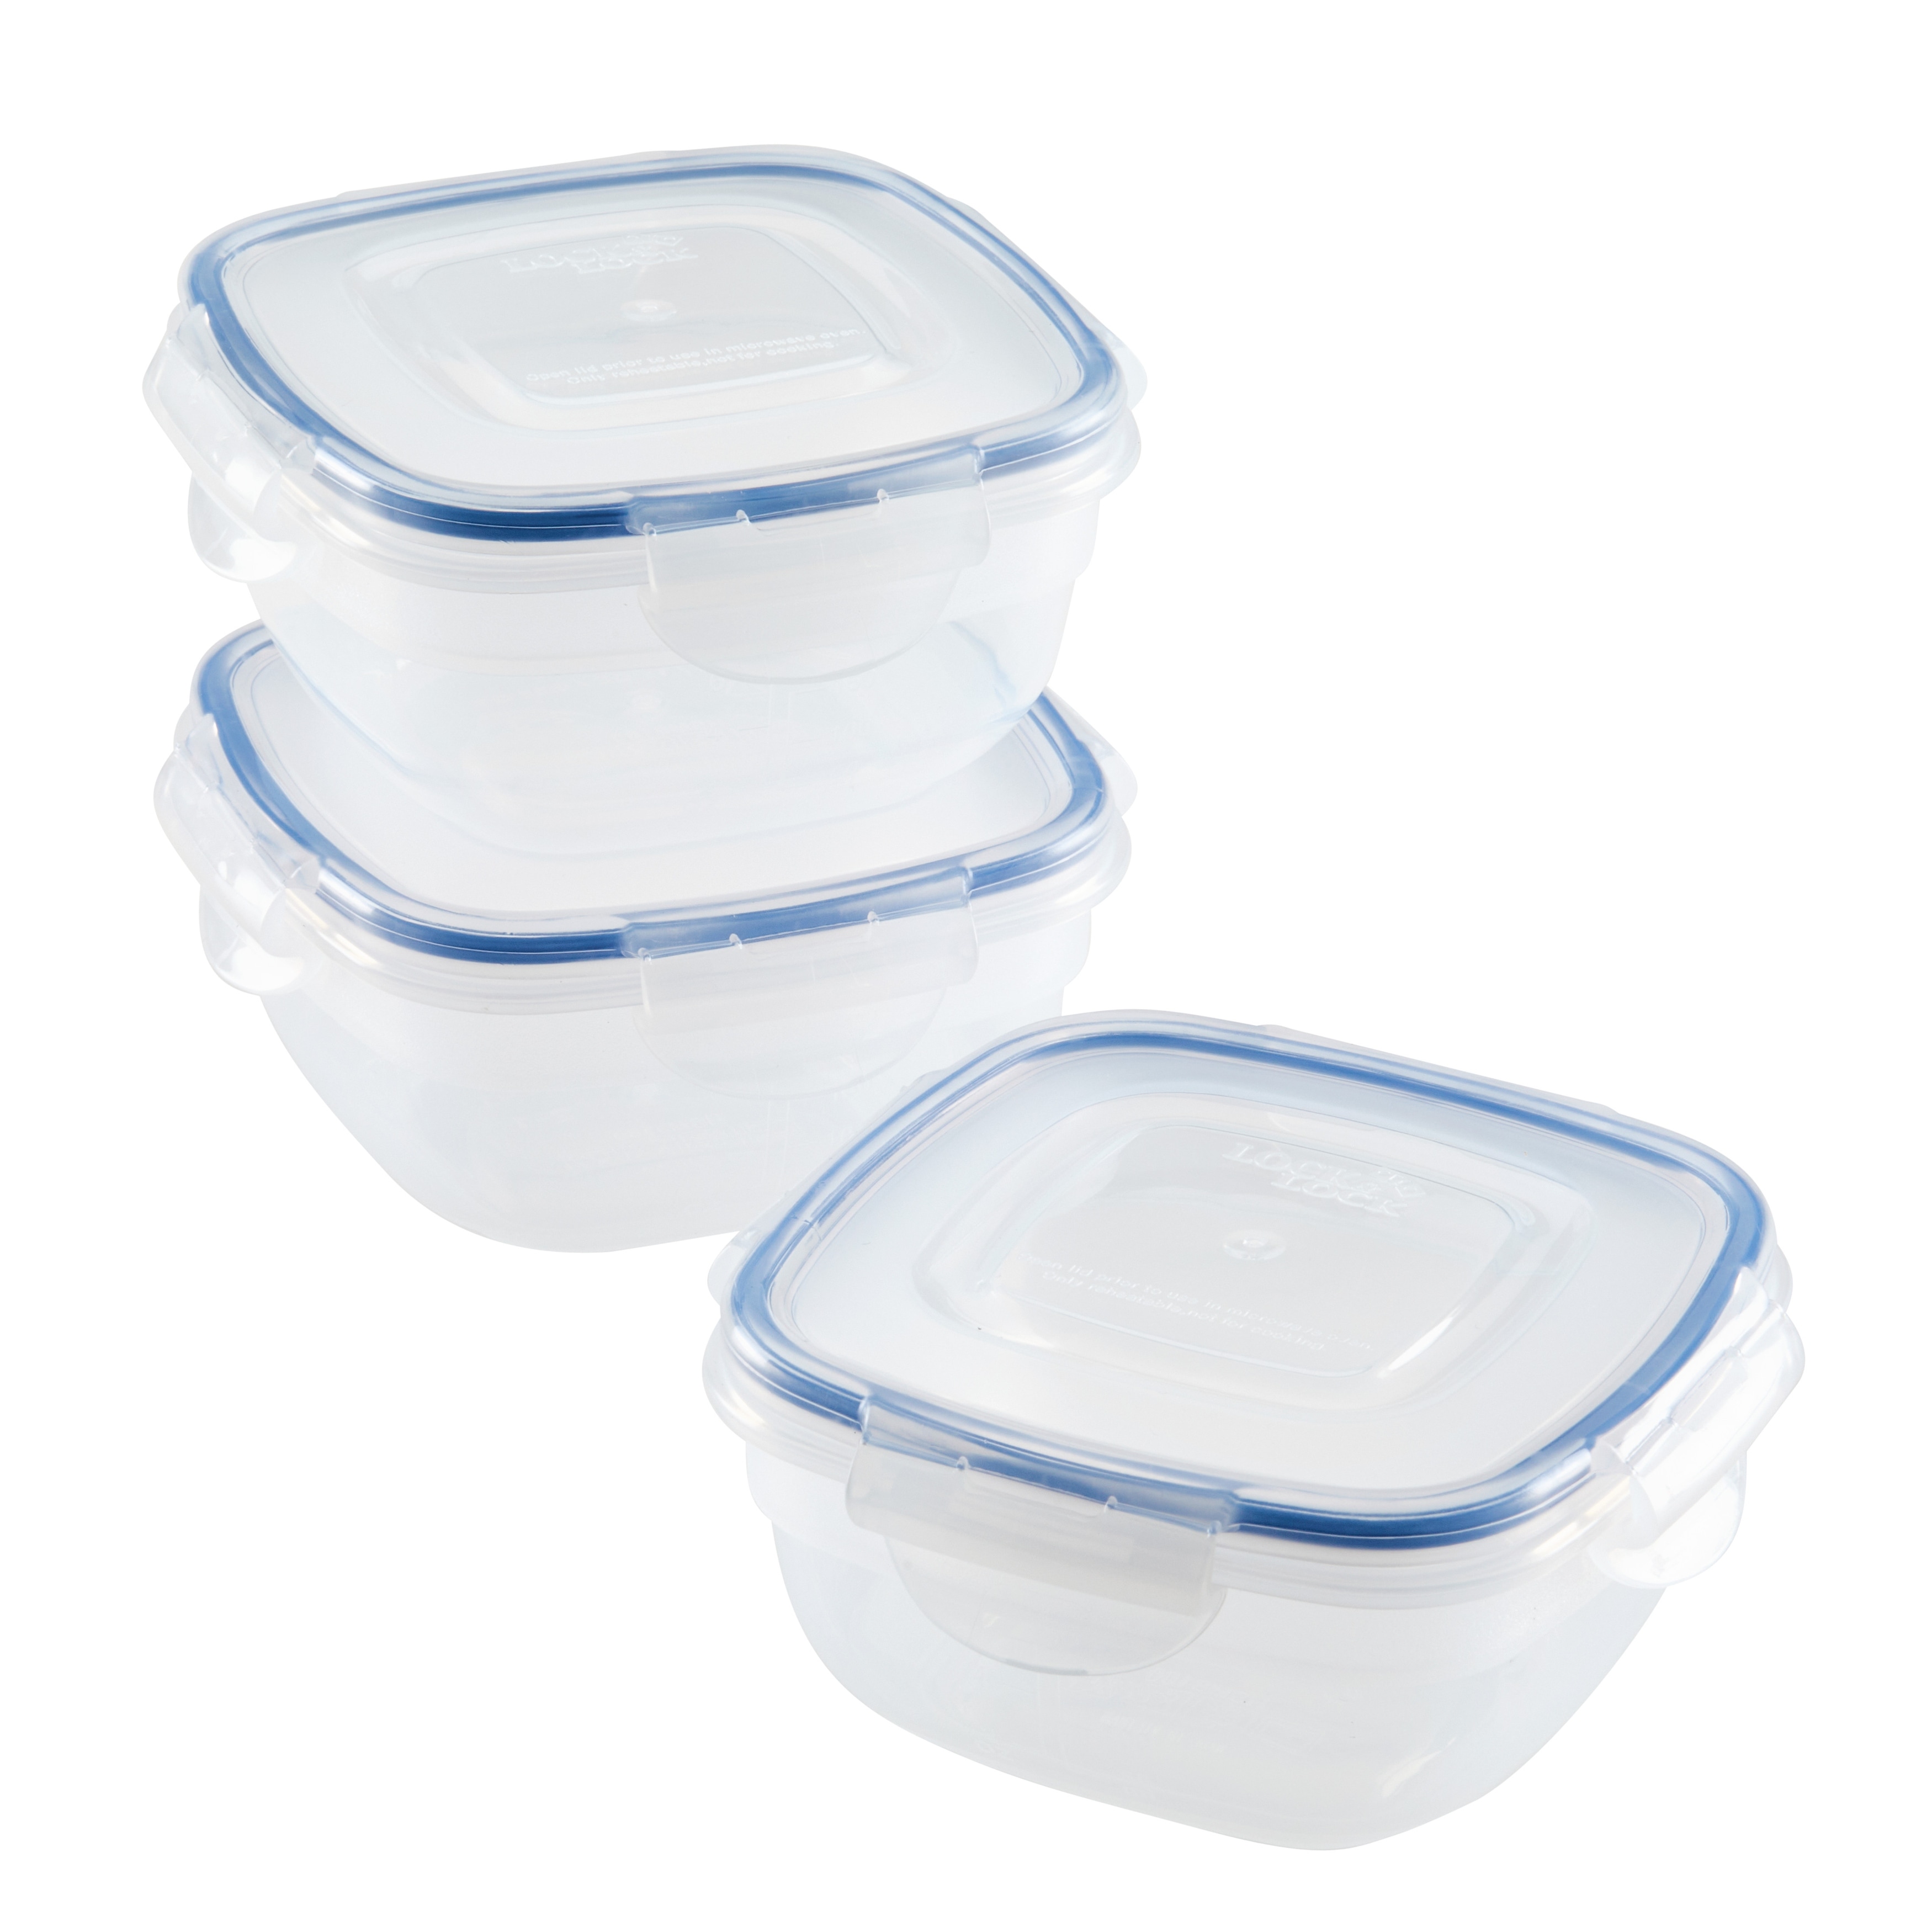 https://ak1.ostkcdn.com/images/products/is/images/direct/0ccdba8f3484f7ad108692f9d95d336ff8fdaedb/LocknLock-Color-Mates-Color-Matching-Food-Storage-Containers-with-Lids%2C-6-Piece-Set%2C-Assorted-Colors.jpg